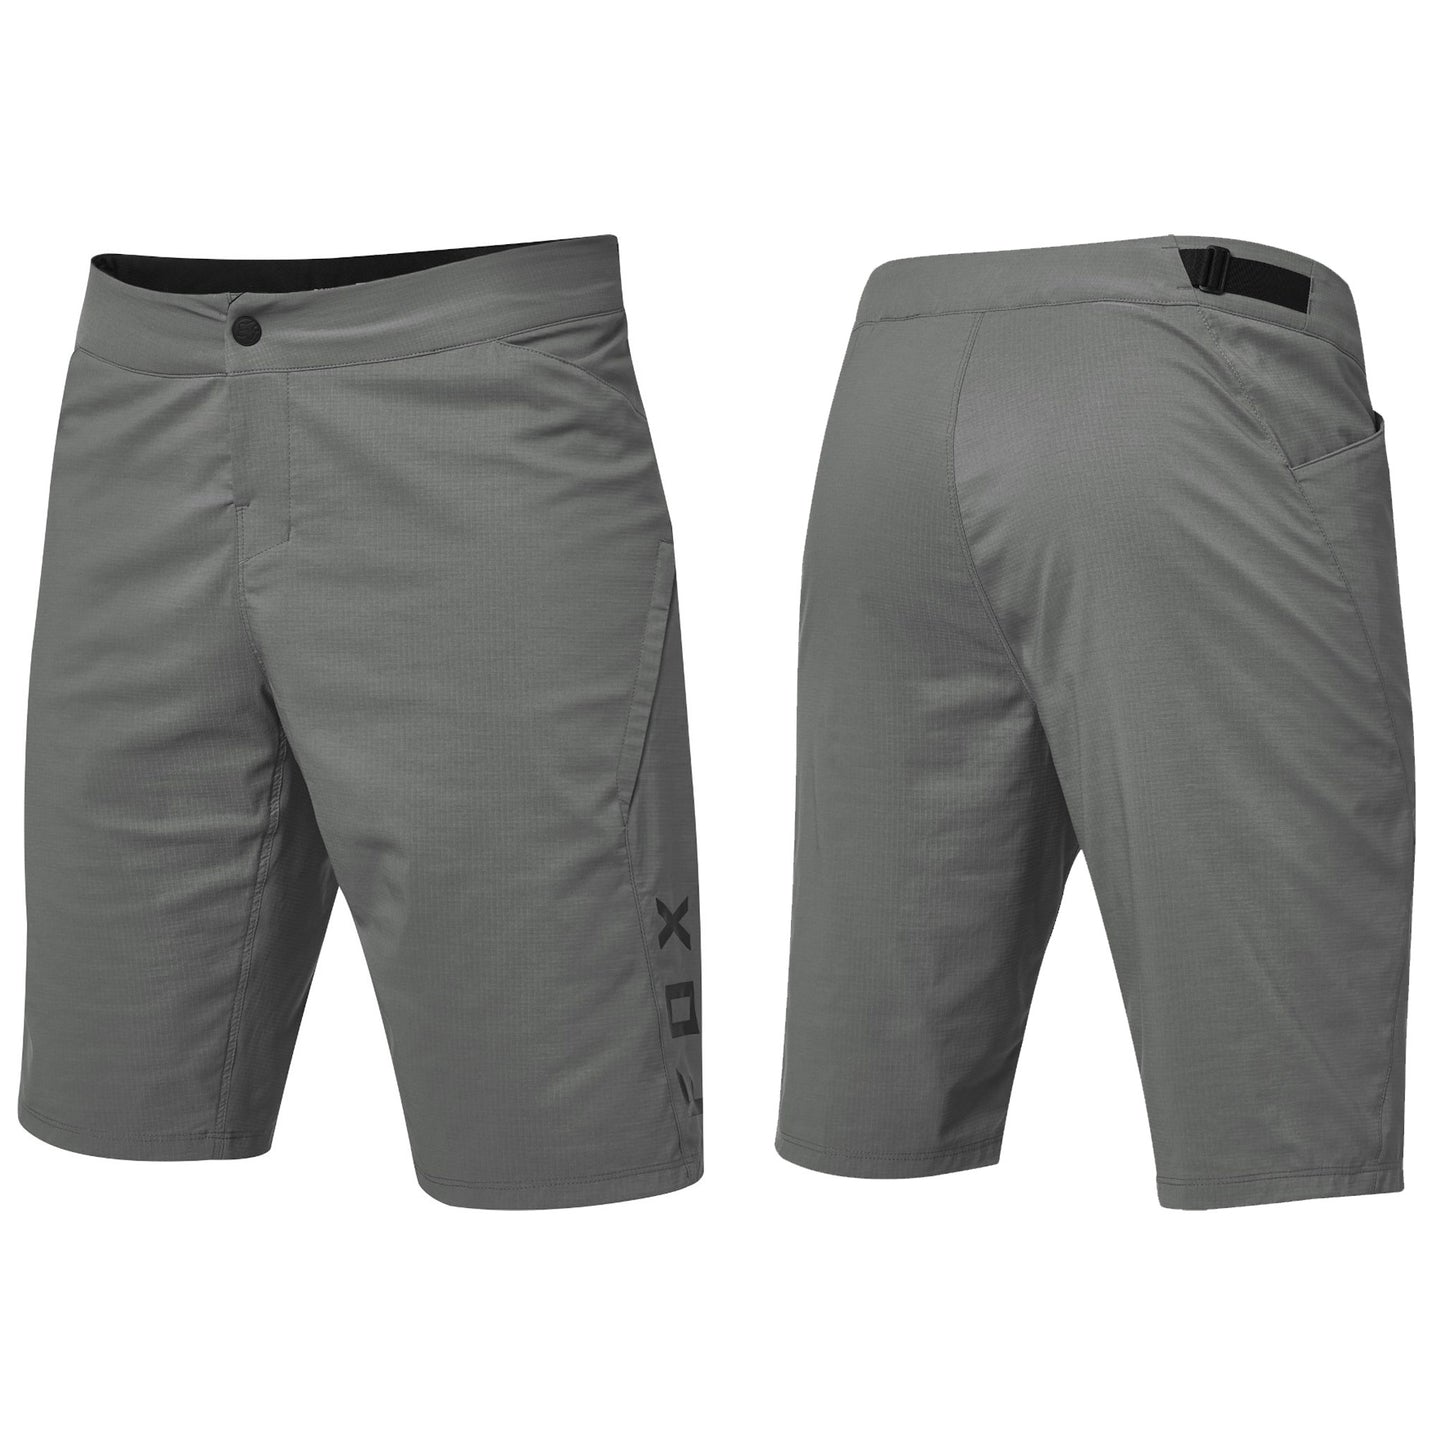 Fox Mens Ranger MTB Shorts - Pewter, buy online at Woolys Wheels Bike Shop with free delivery